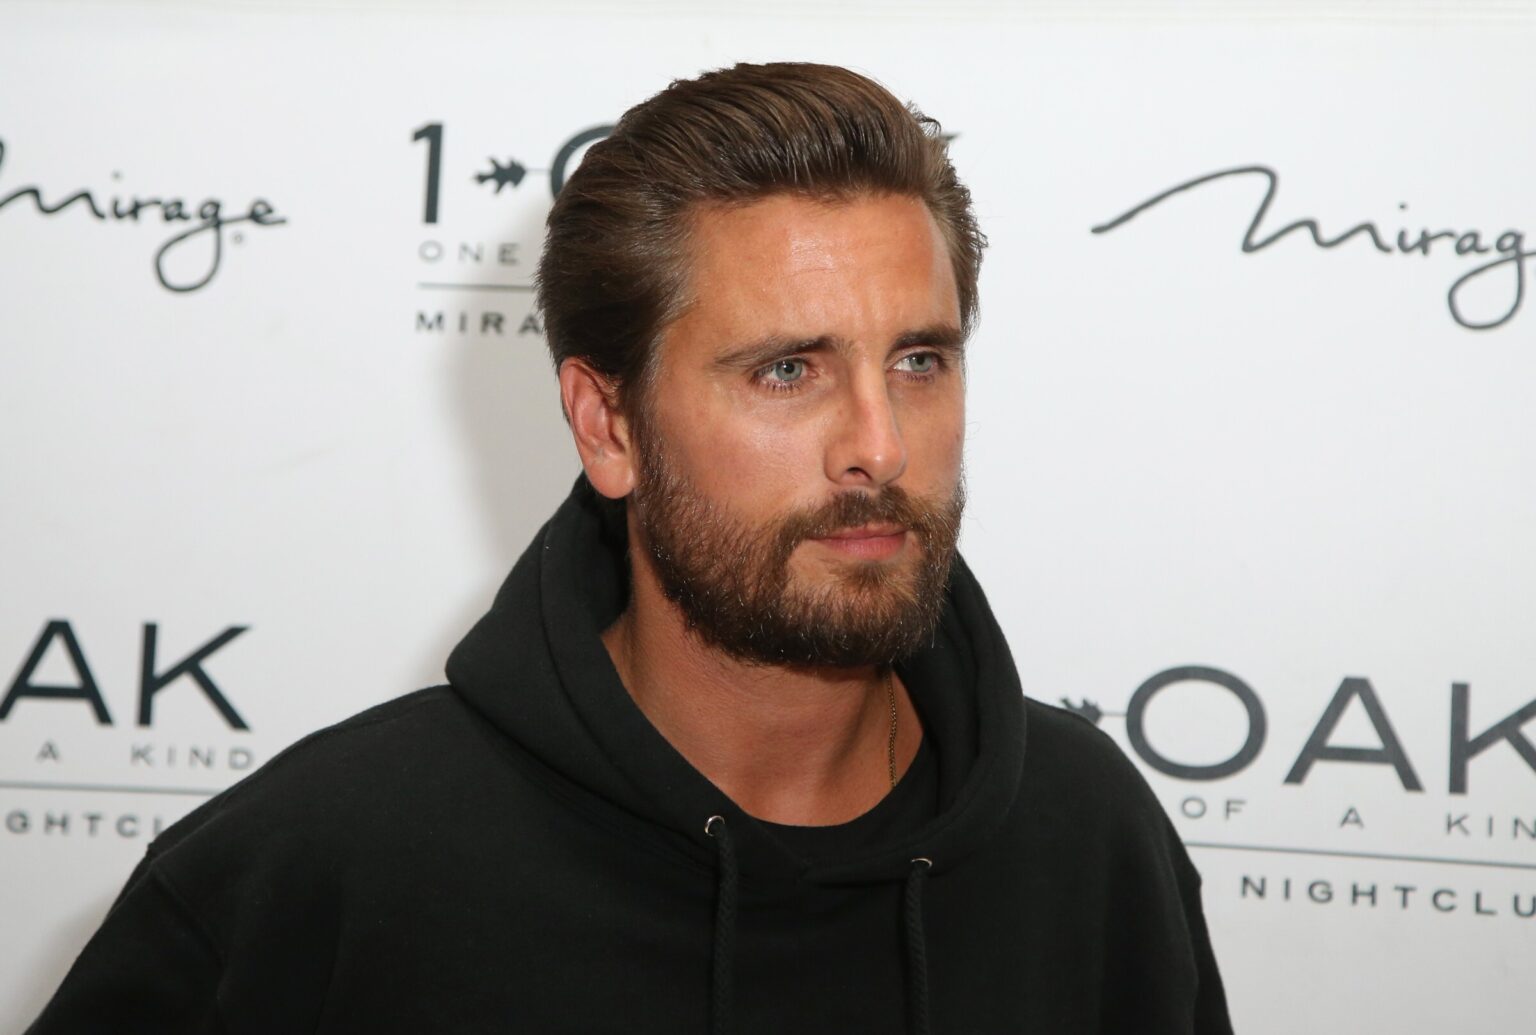 Larsa Pippen and Kim Kardashian have parted ways. But could the reason be because of Scott Disick? Check out the details of this shocking scandal.